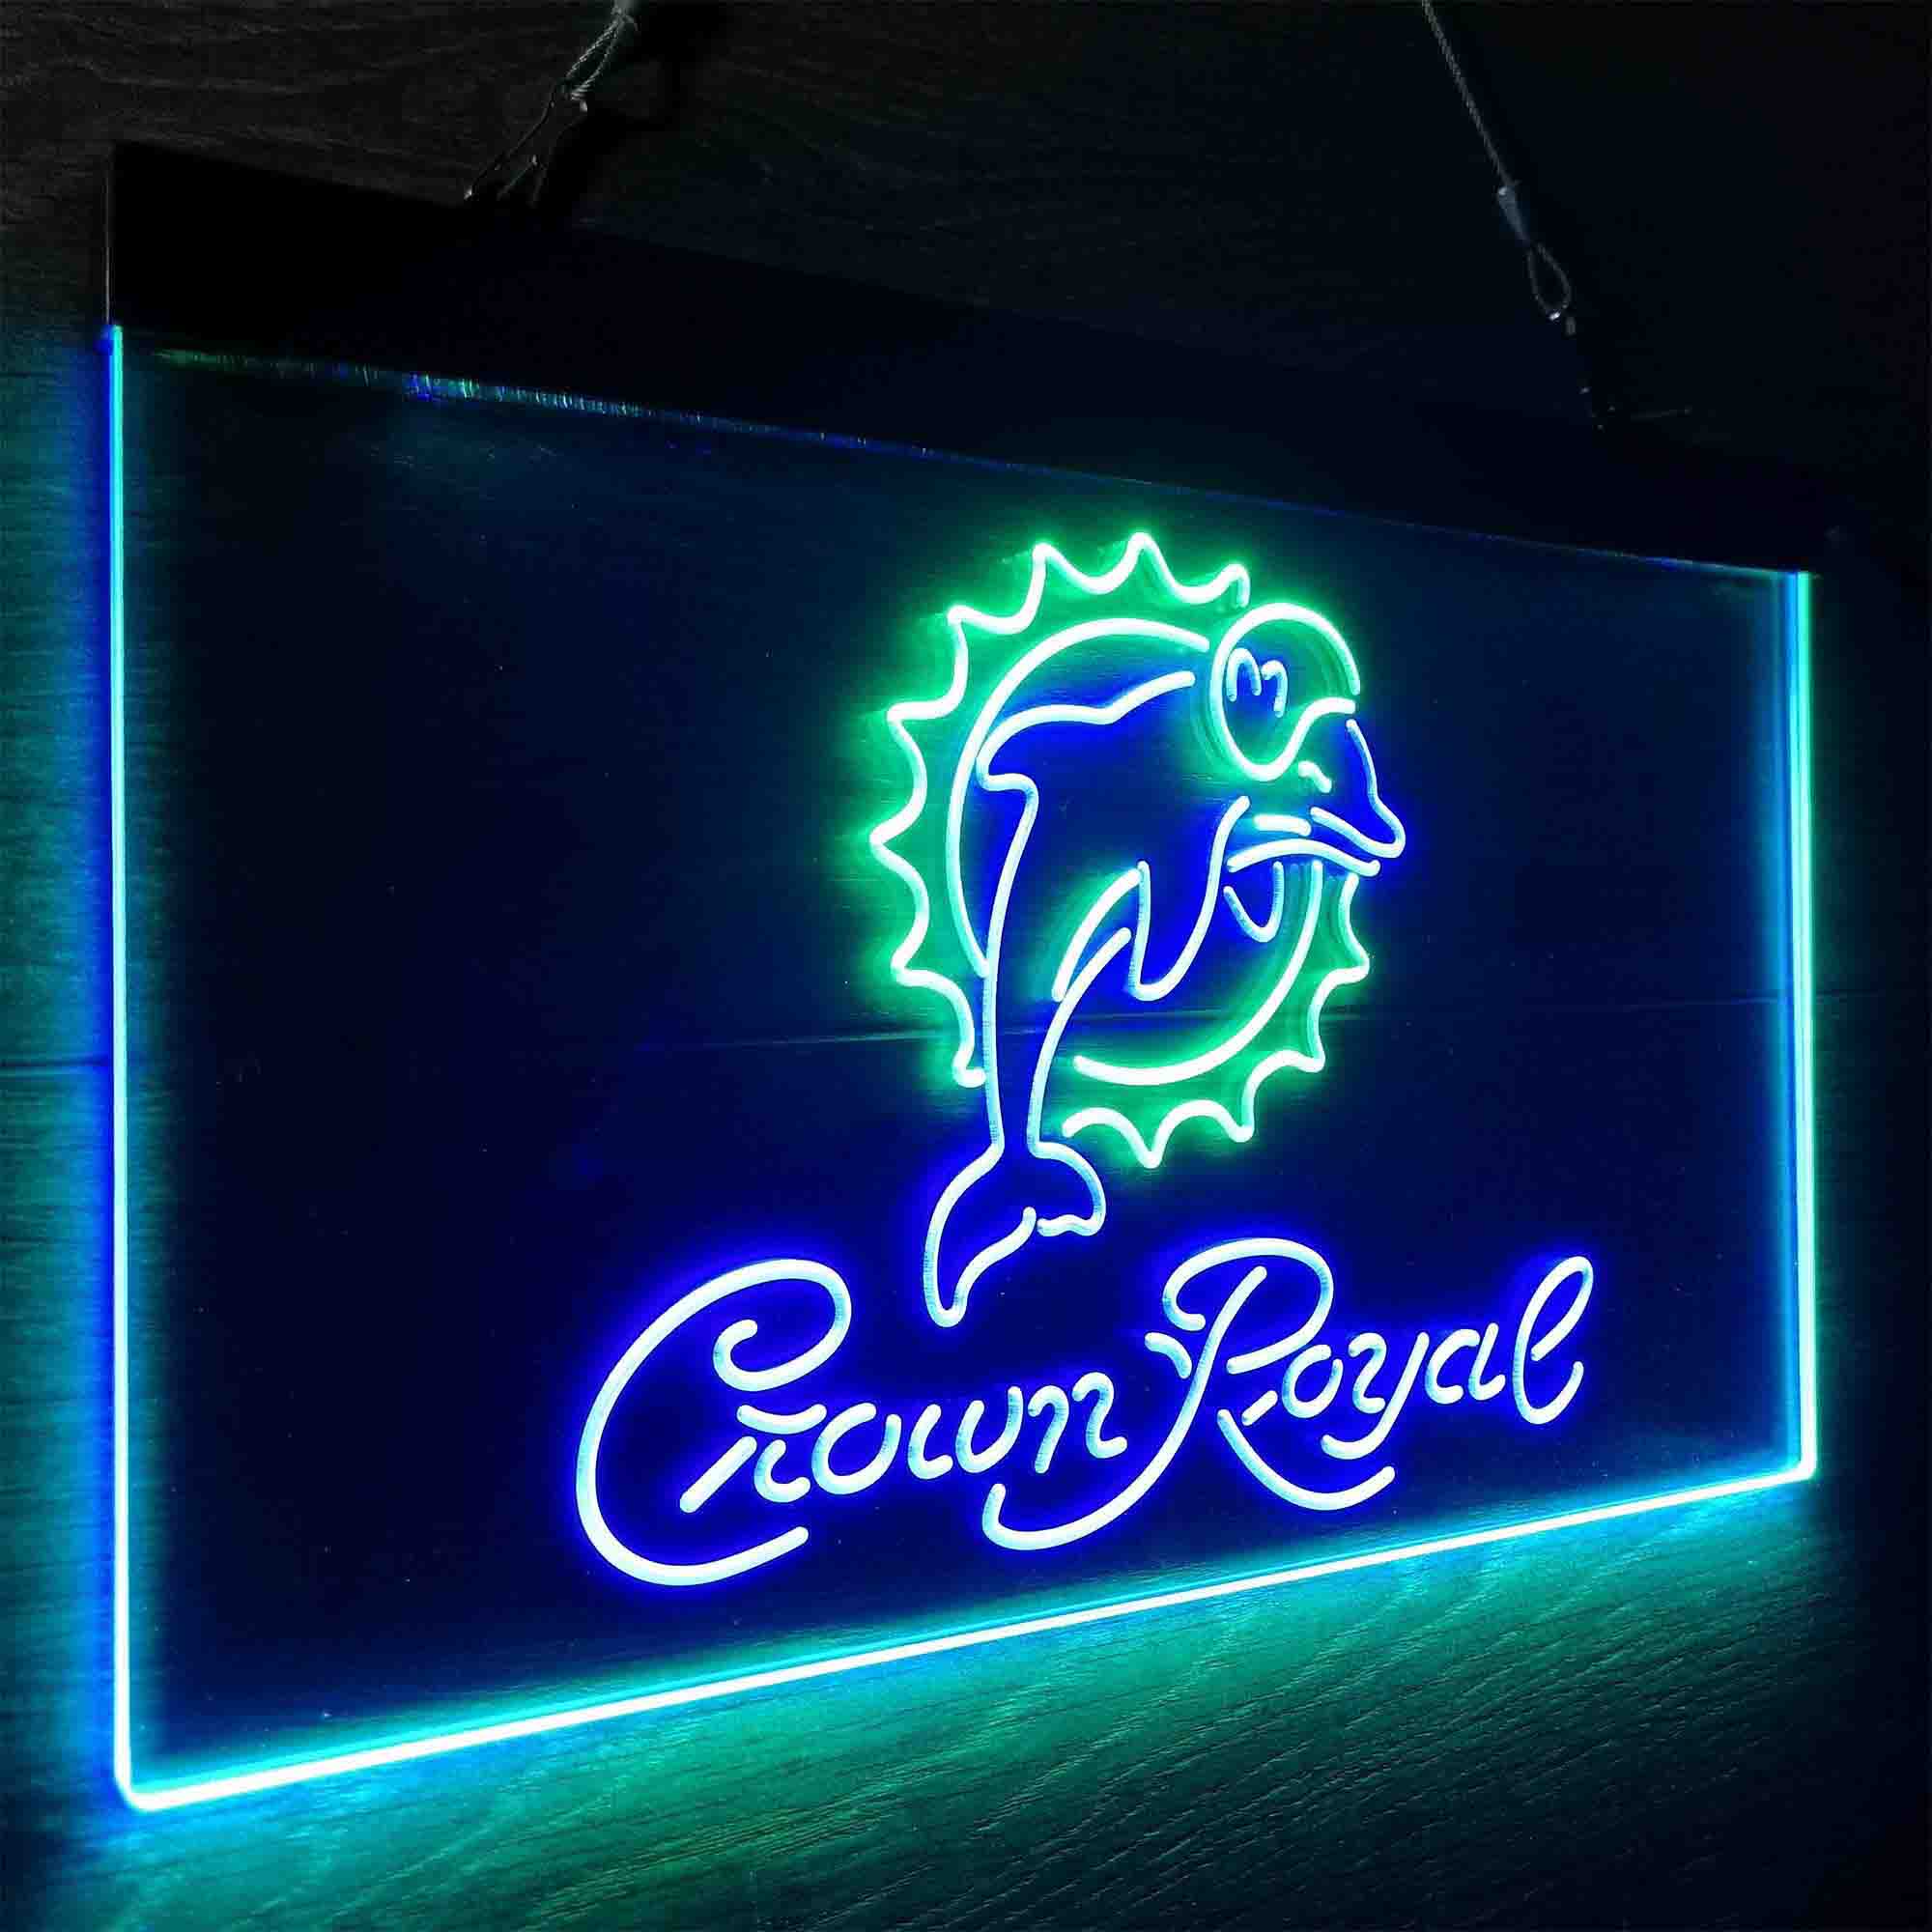 Miami Dolphins Crown Royal Neon-Like LED Sign - ProLedSign